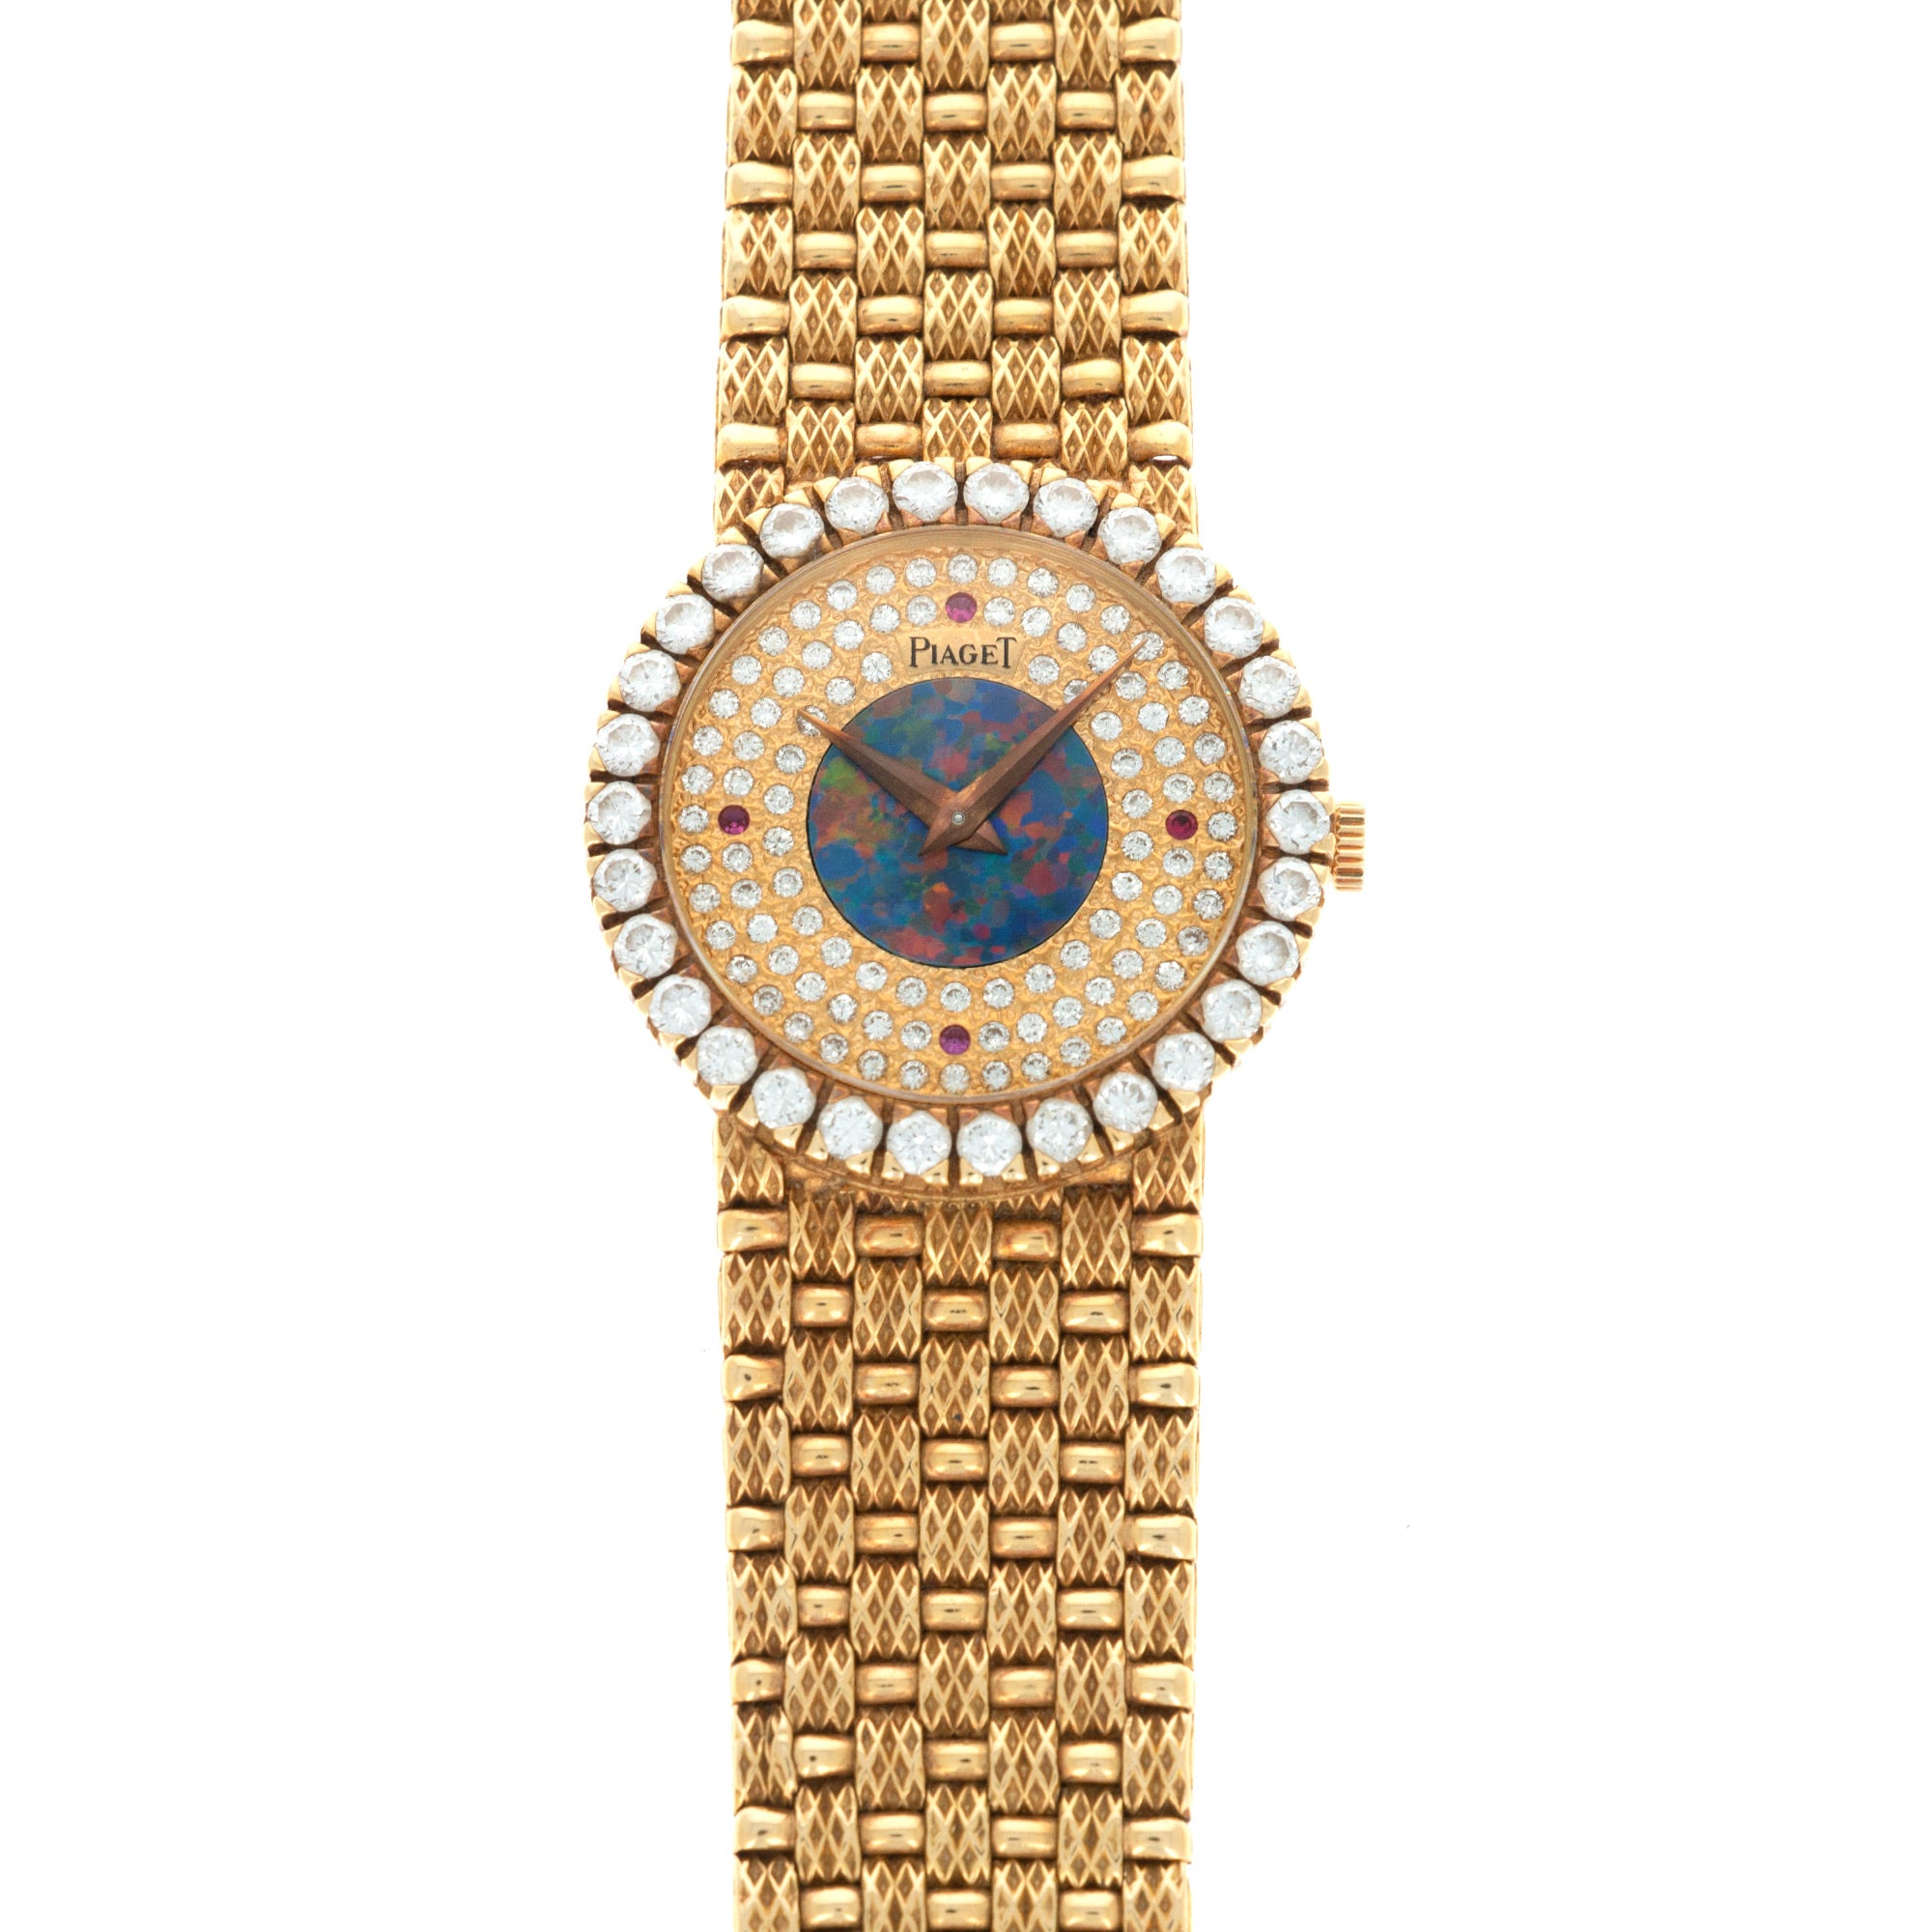 Piaget - Piaget Yellow Gold Watch with Diamond Bezel and Opal, Diamond and Ruby Dial - The Keystone Watches